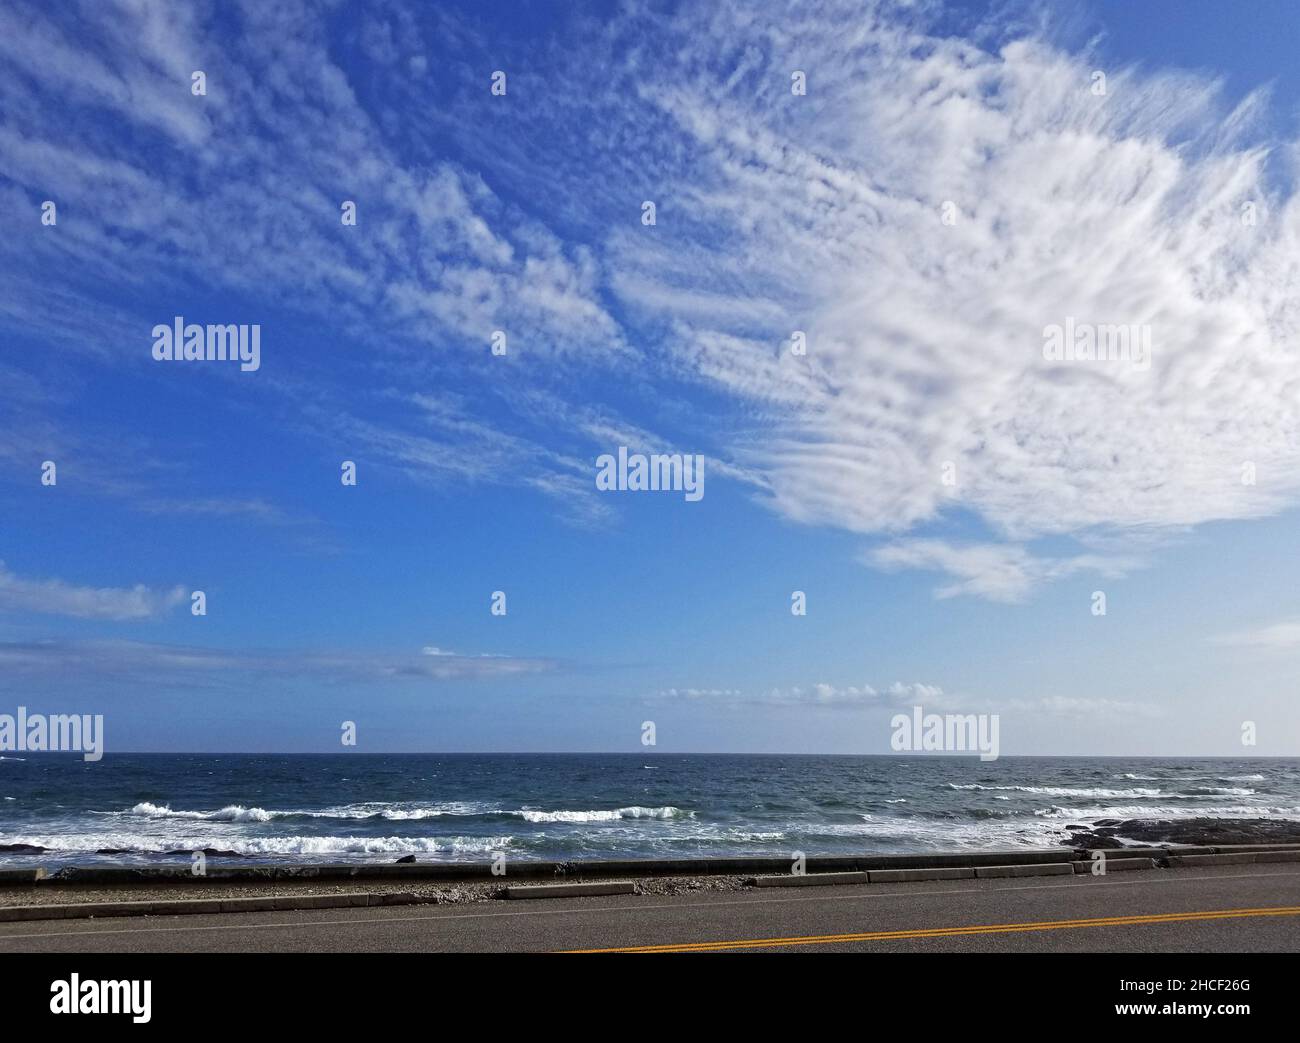 Ocean waves crash into rocky shore at Brenton Point in Newport, Rhode Island, while some stratus clouds drift by on an otherwise blue sky -05 Stock Photo